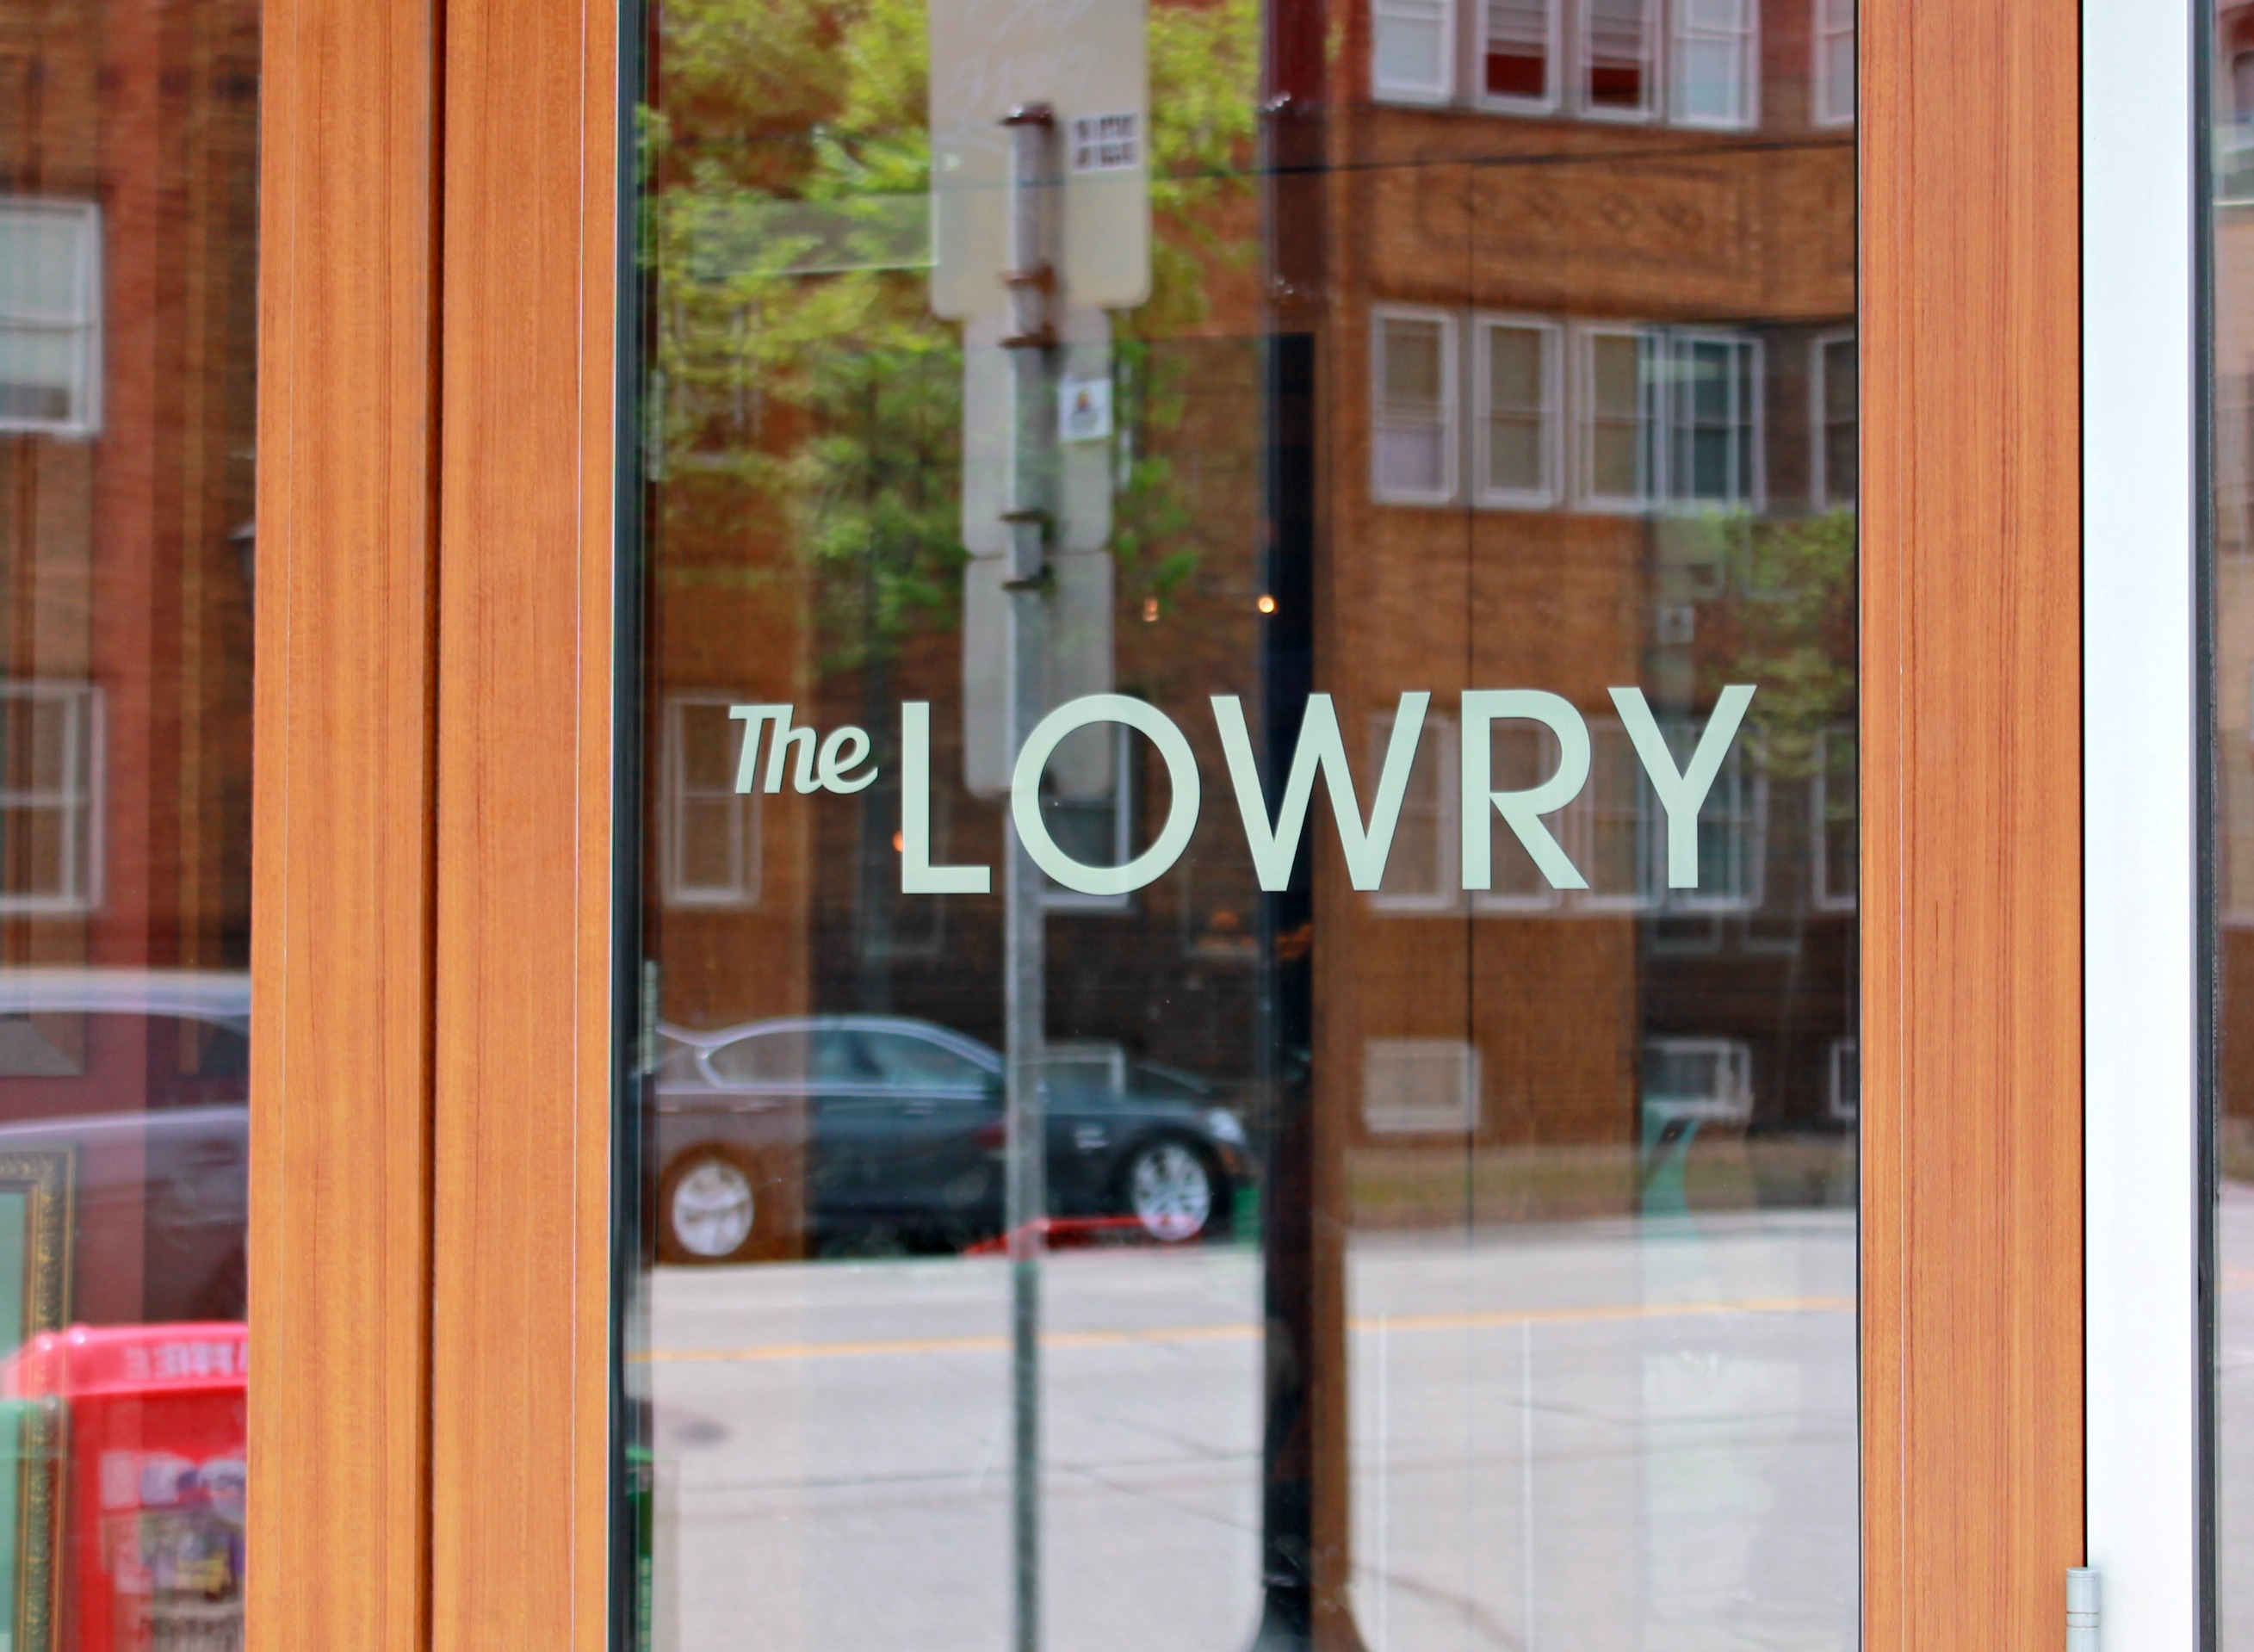 The Lowry in Uptown Minneapolis